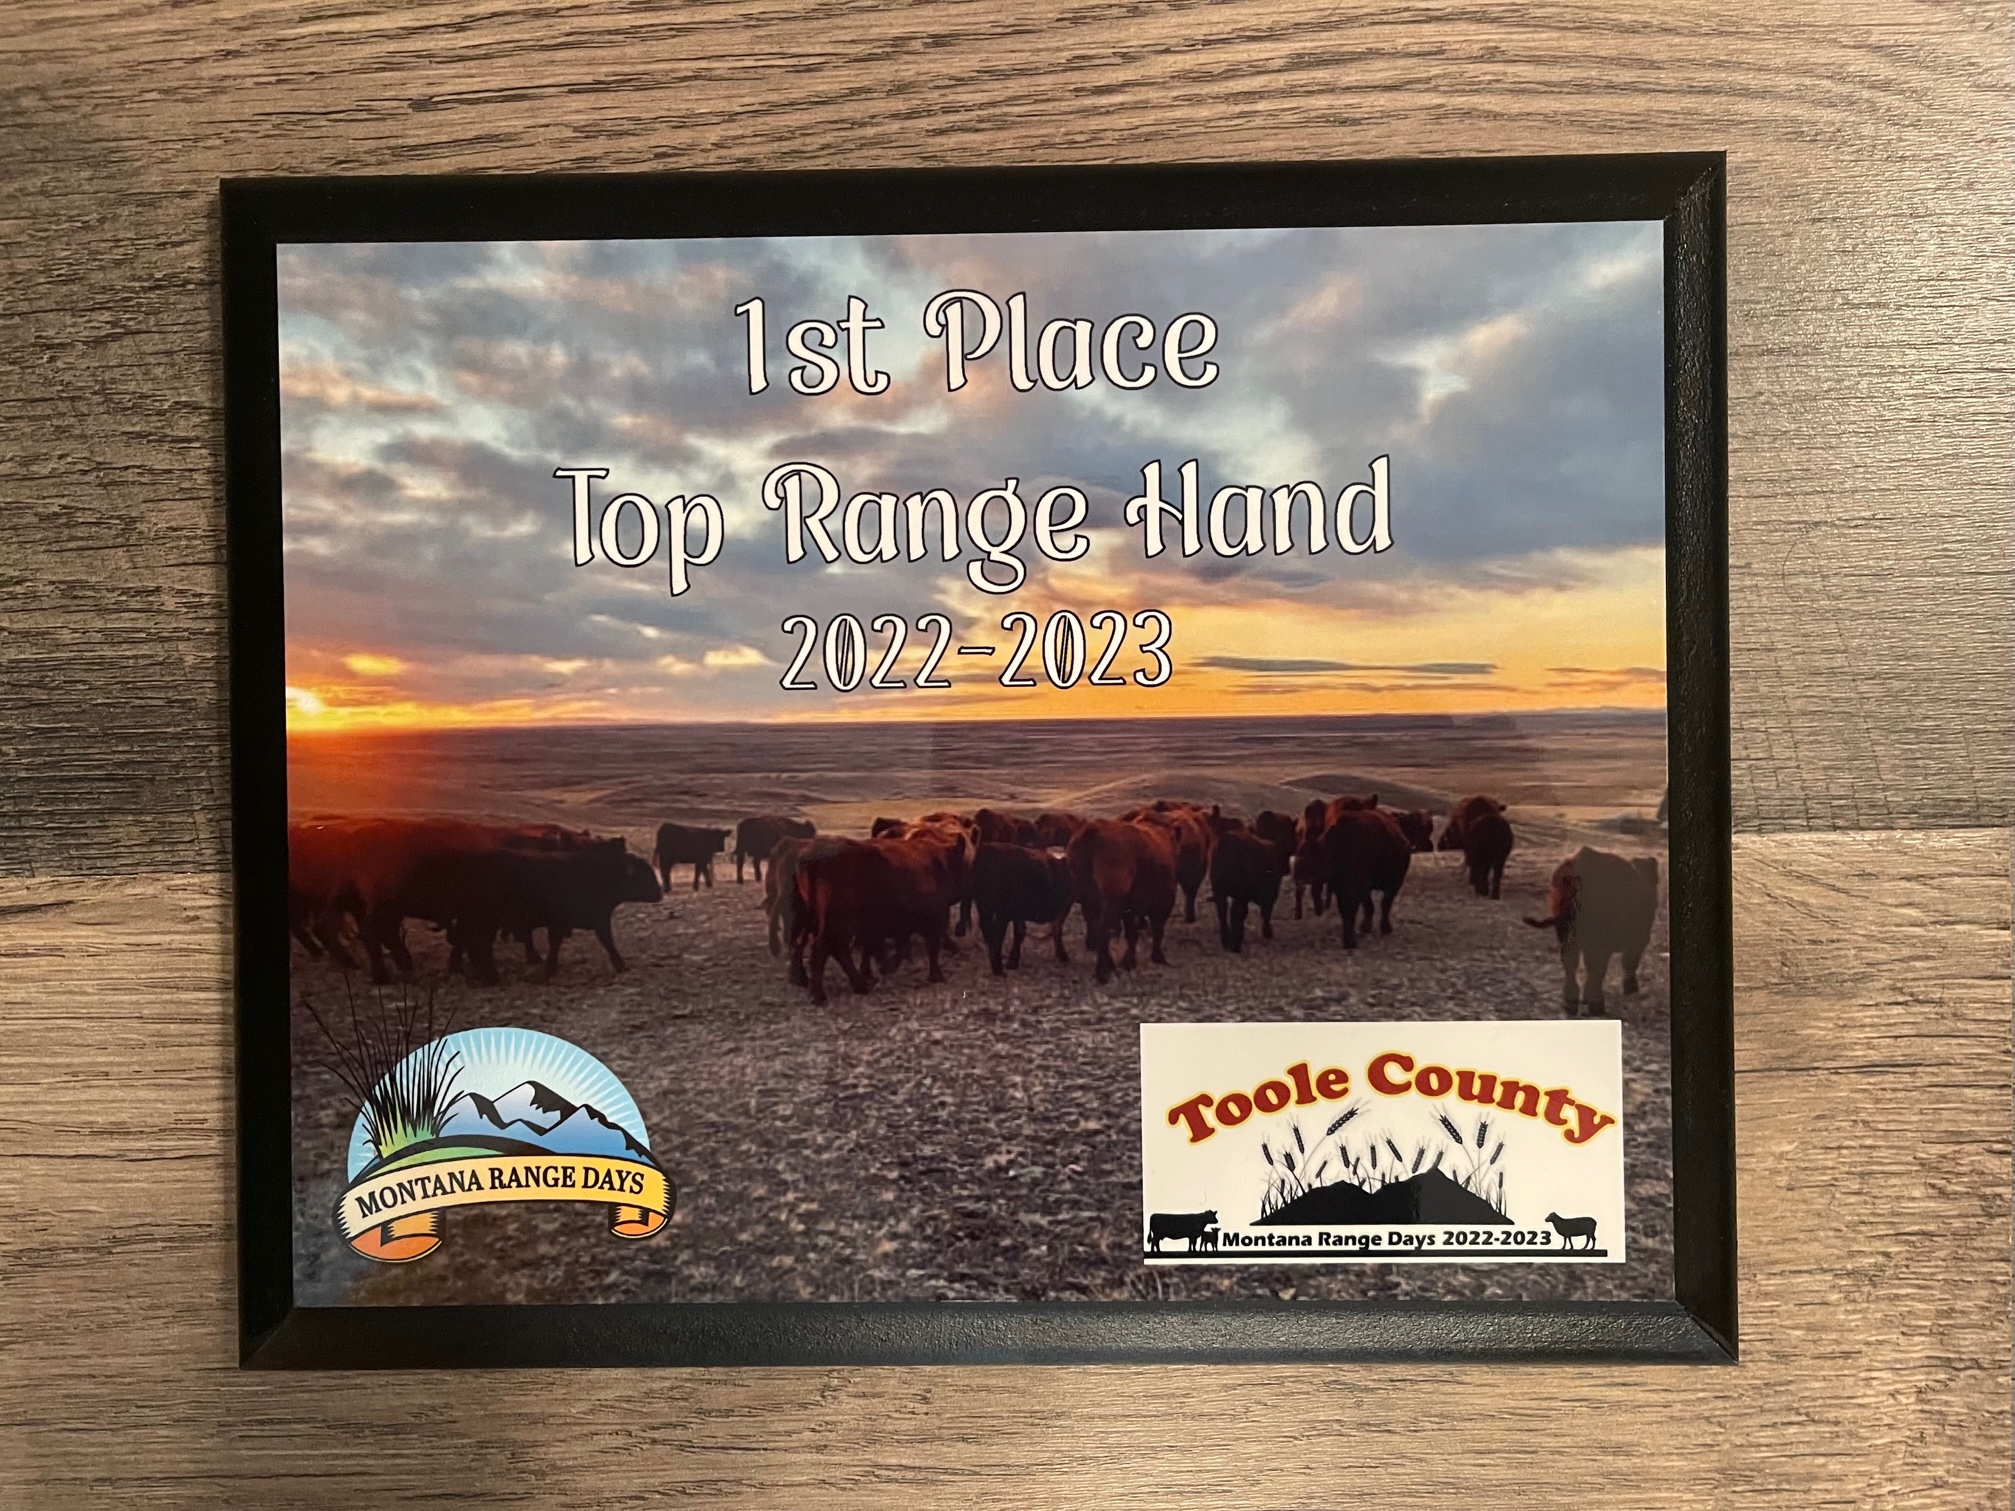 We were able to create beautiful photo plaques for a gathering in our community for Montana Ran